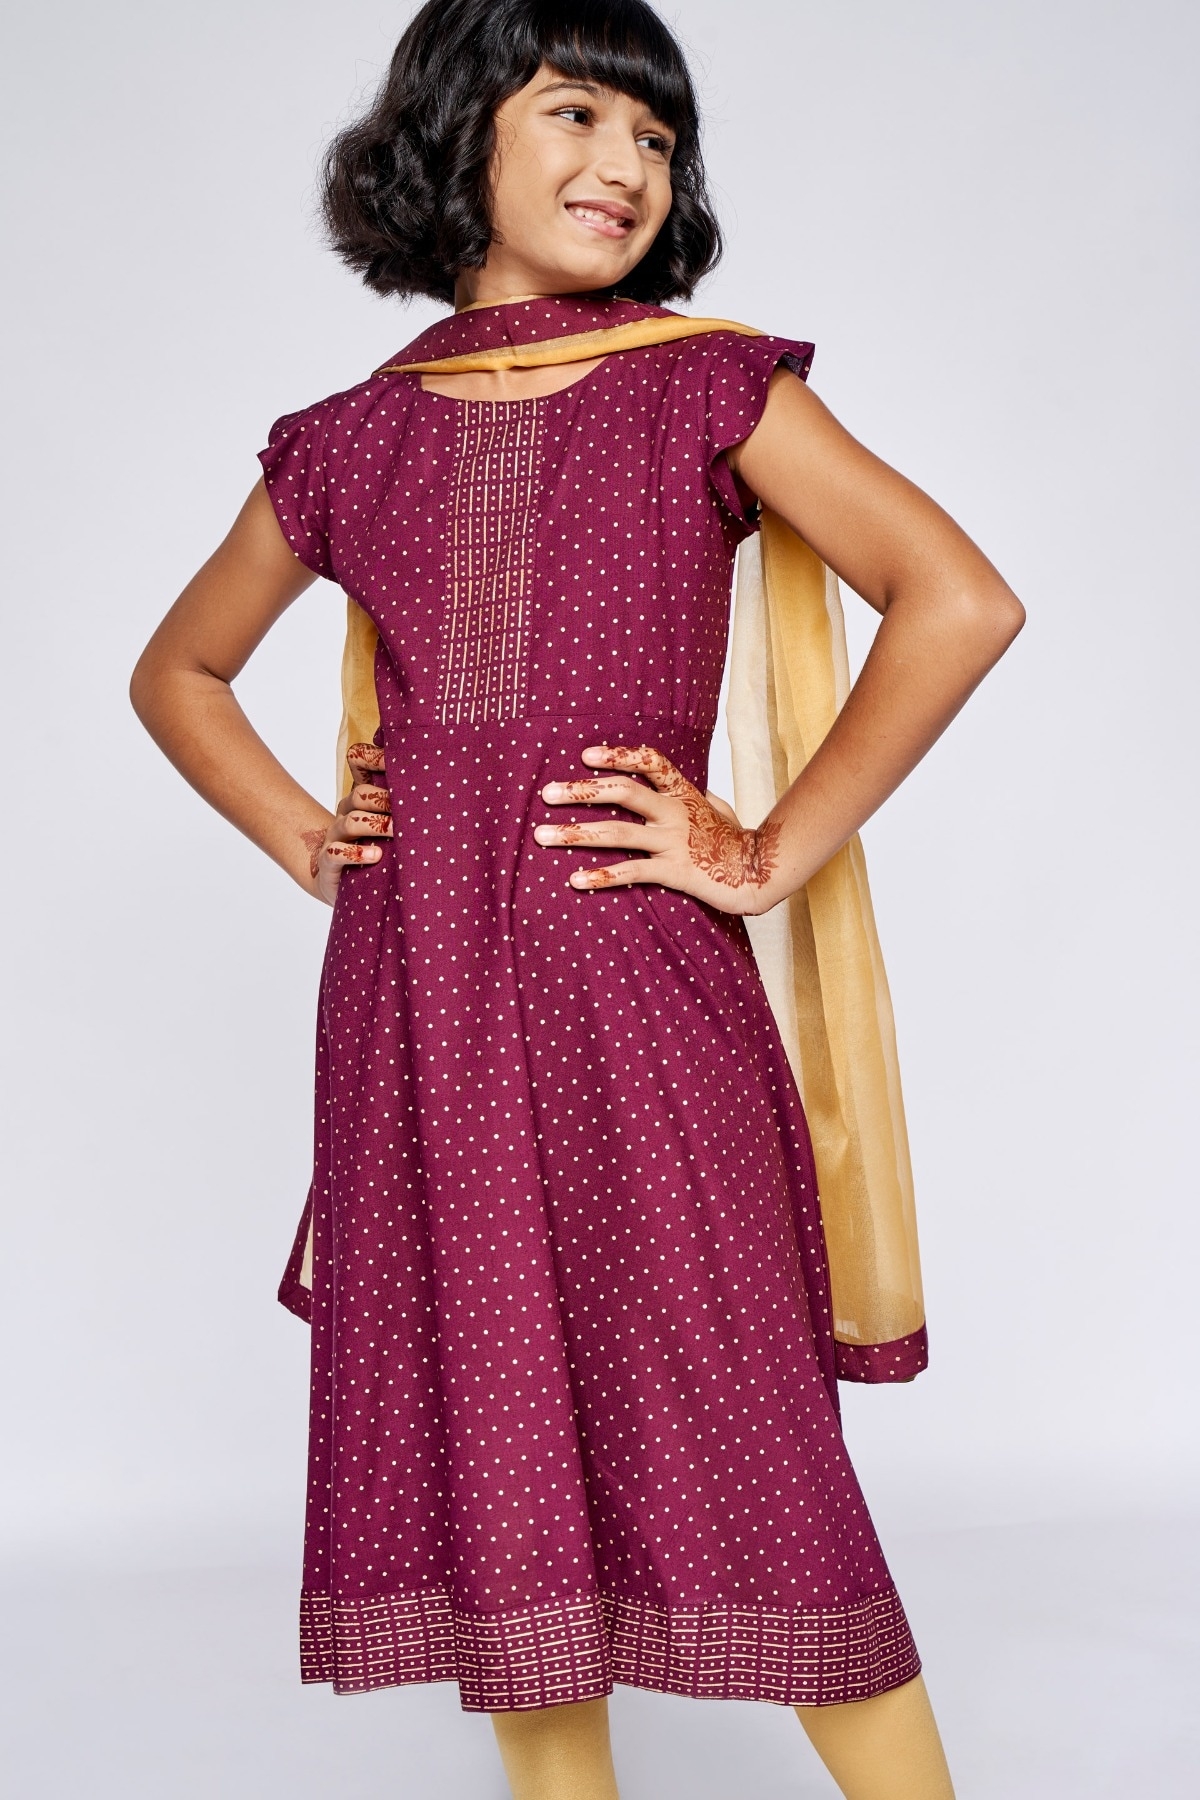 Global Desi | Maroon Embellished Fit and Flare Suit